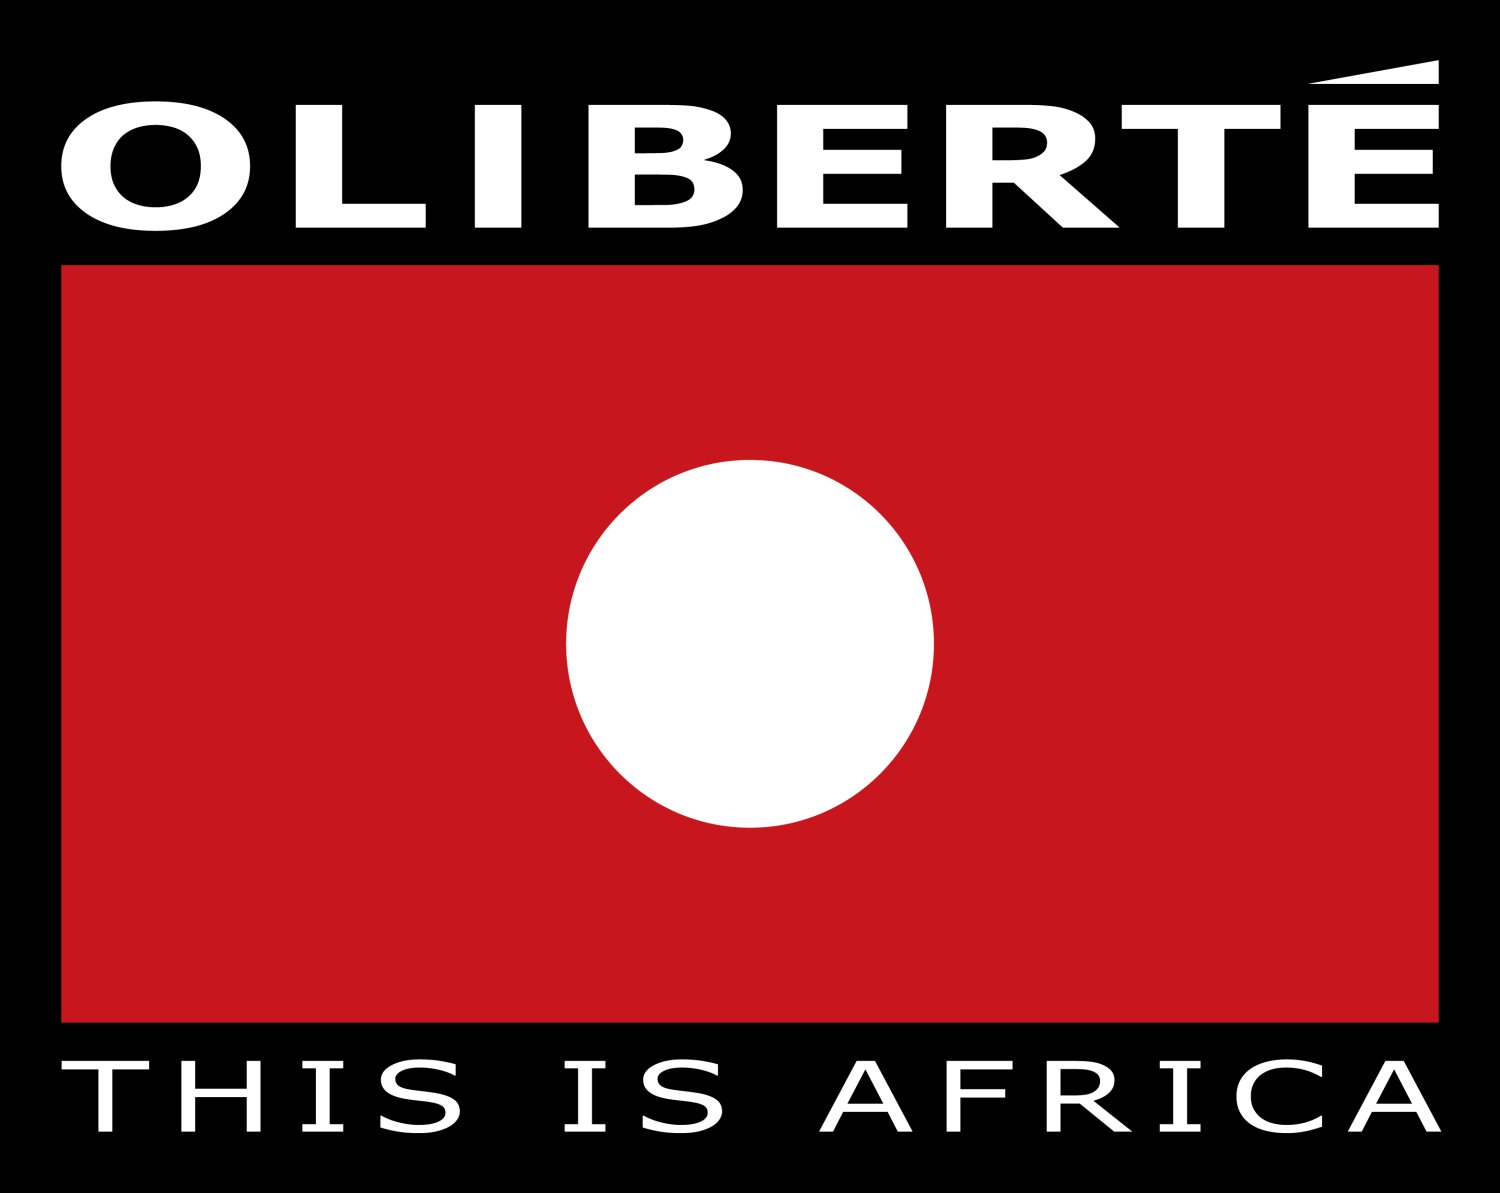 Oliberté Footwear Launches 1st Premium Shoe Company Made in Africa Image.